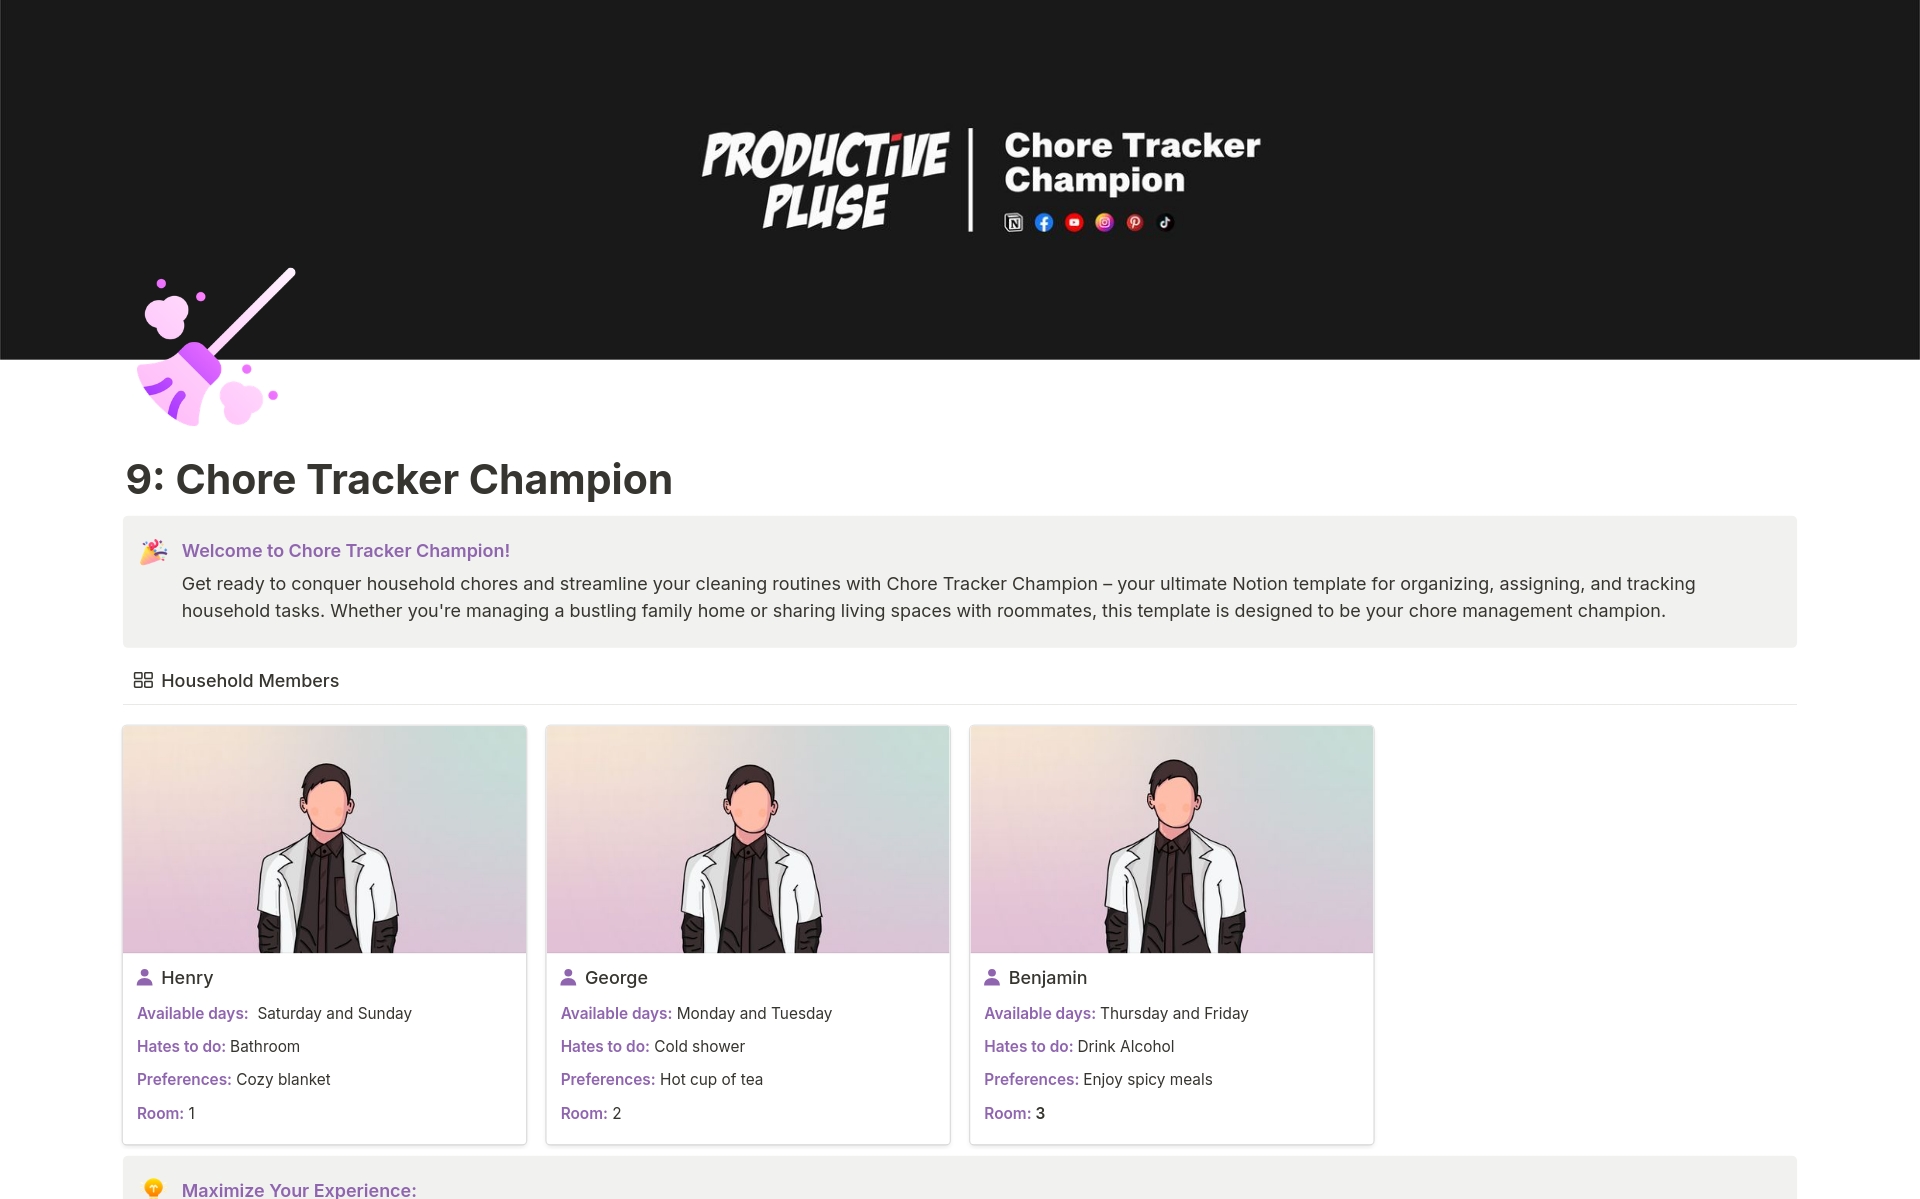 Chore Tracker Champion is a template that is focused on managing household chores and providing tools for organizing and tracking tasks related to home maintenance.